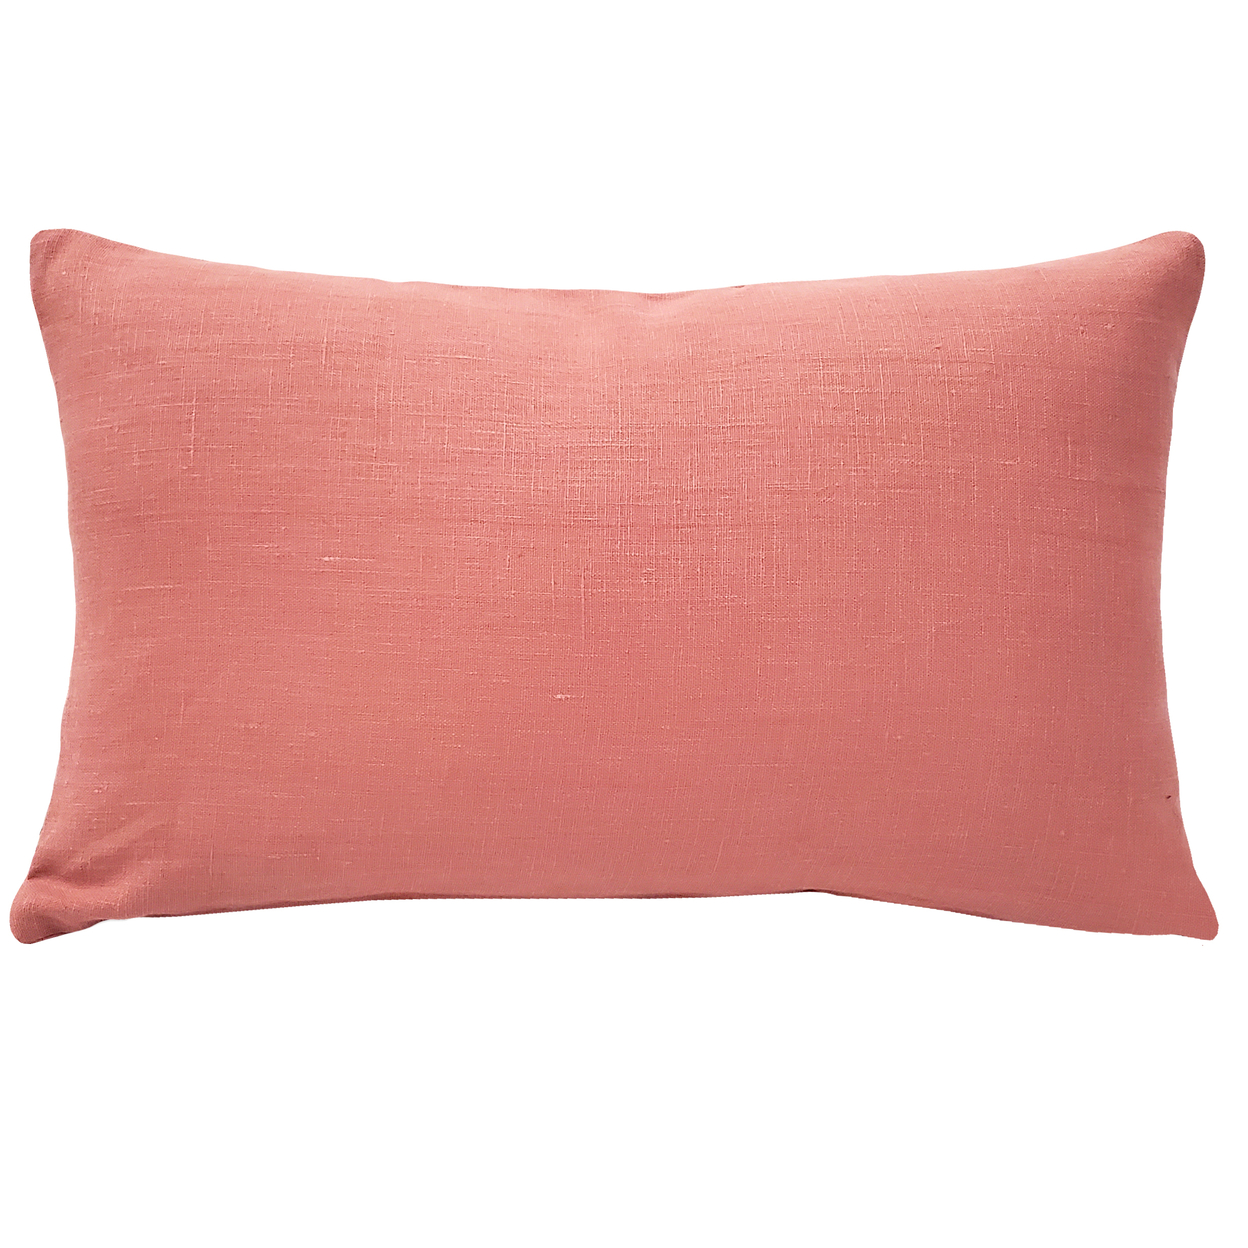 Tuscany Linen Deep Blush Throw Pillow 12x19, With Polyfill Insert